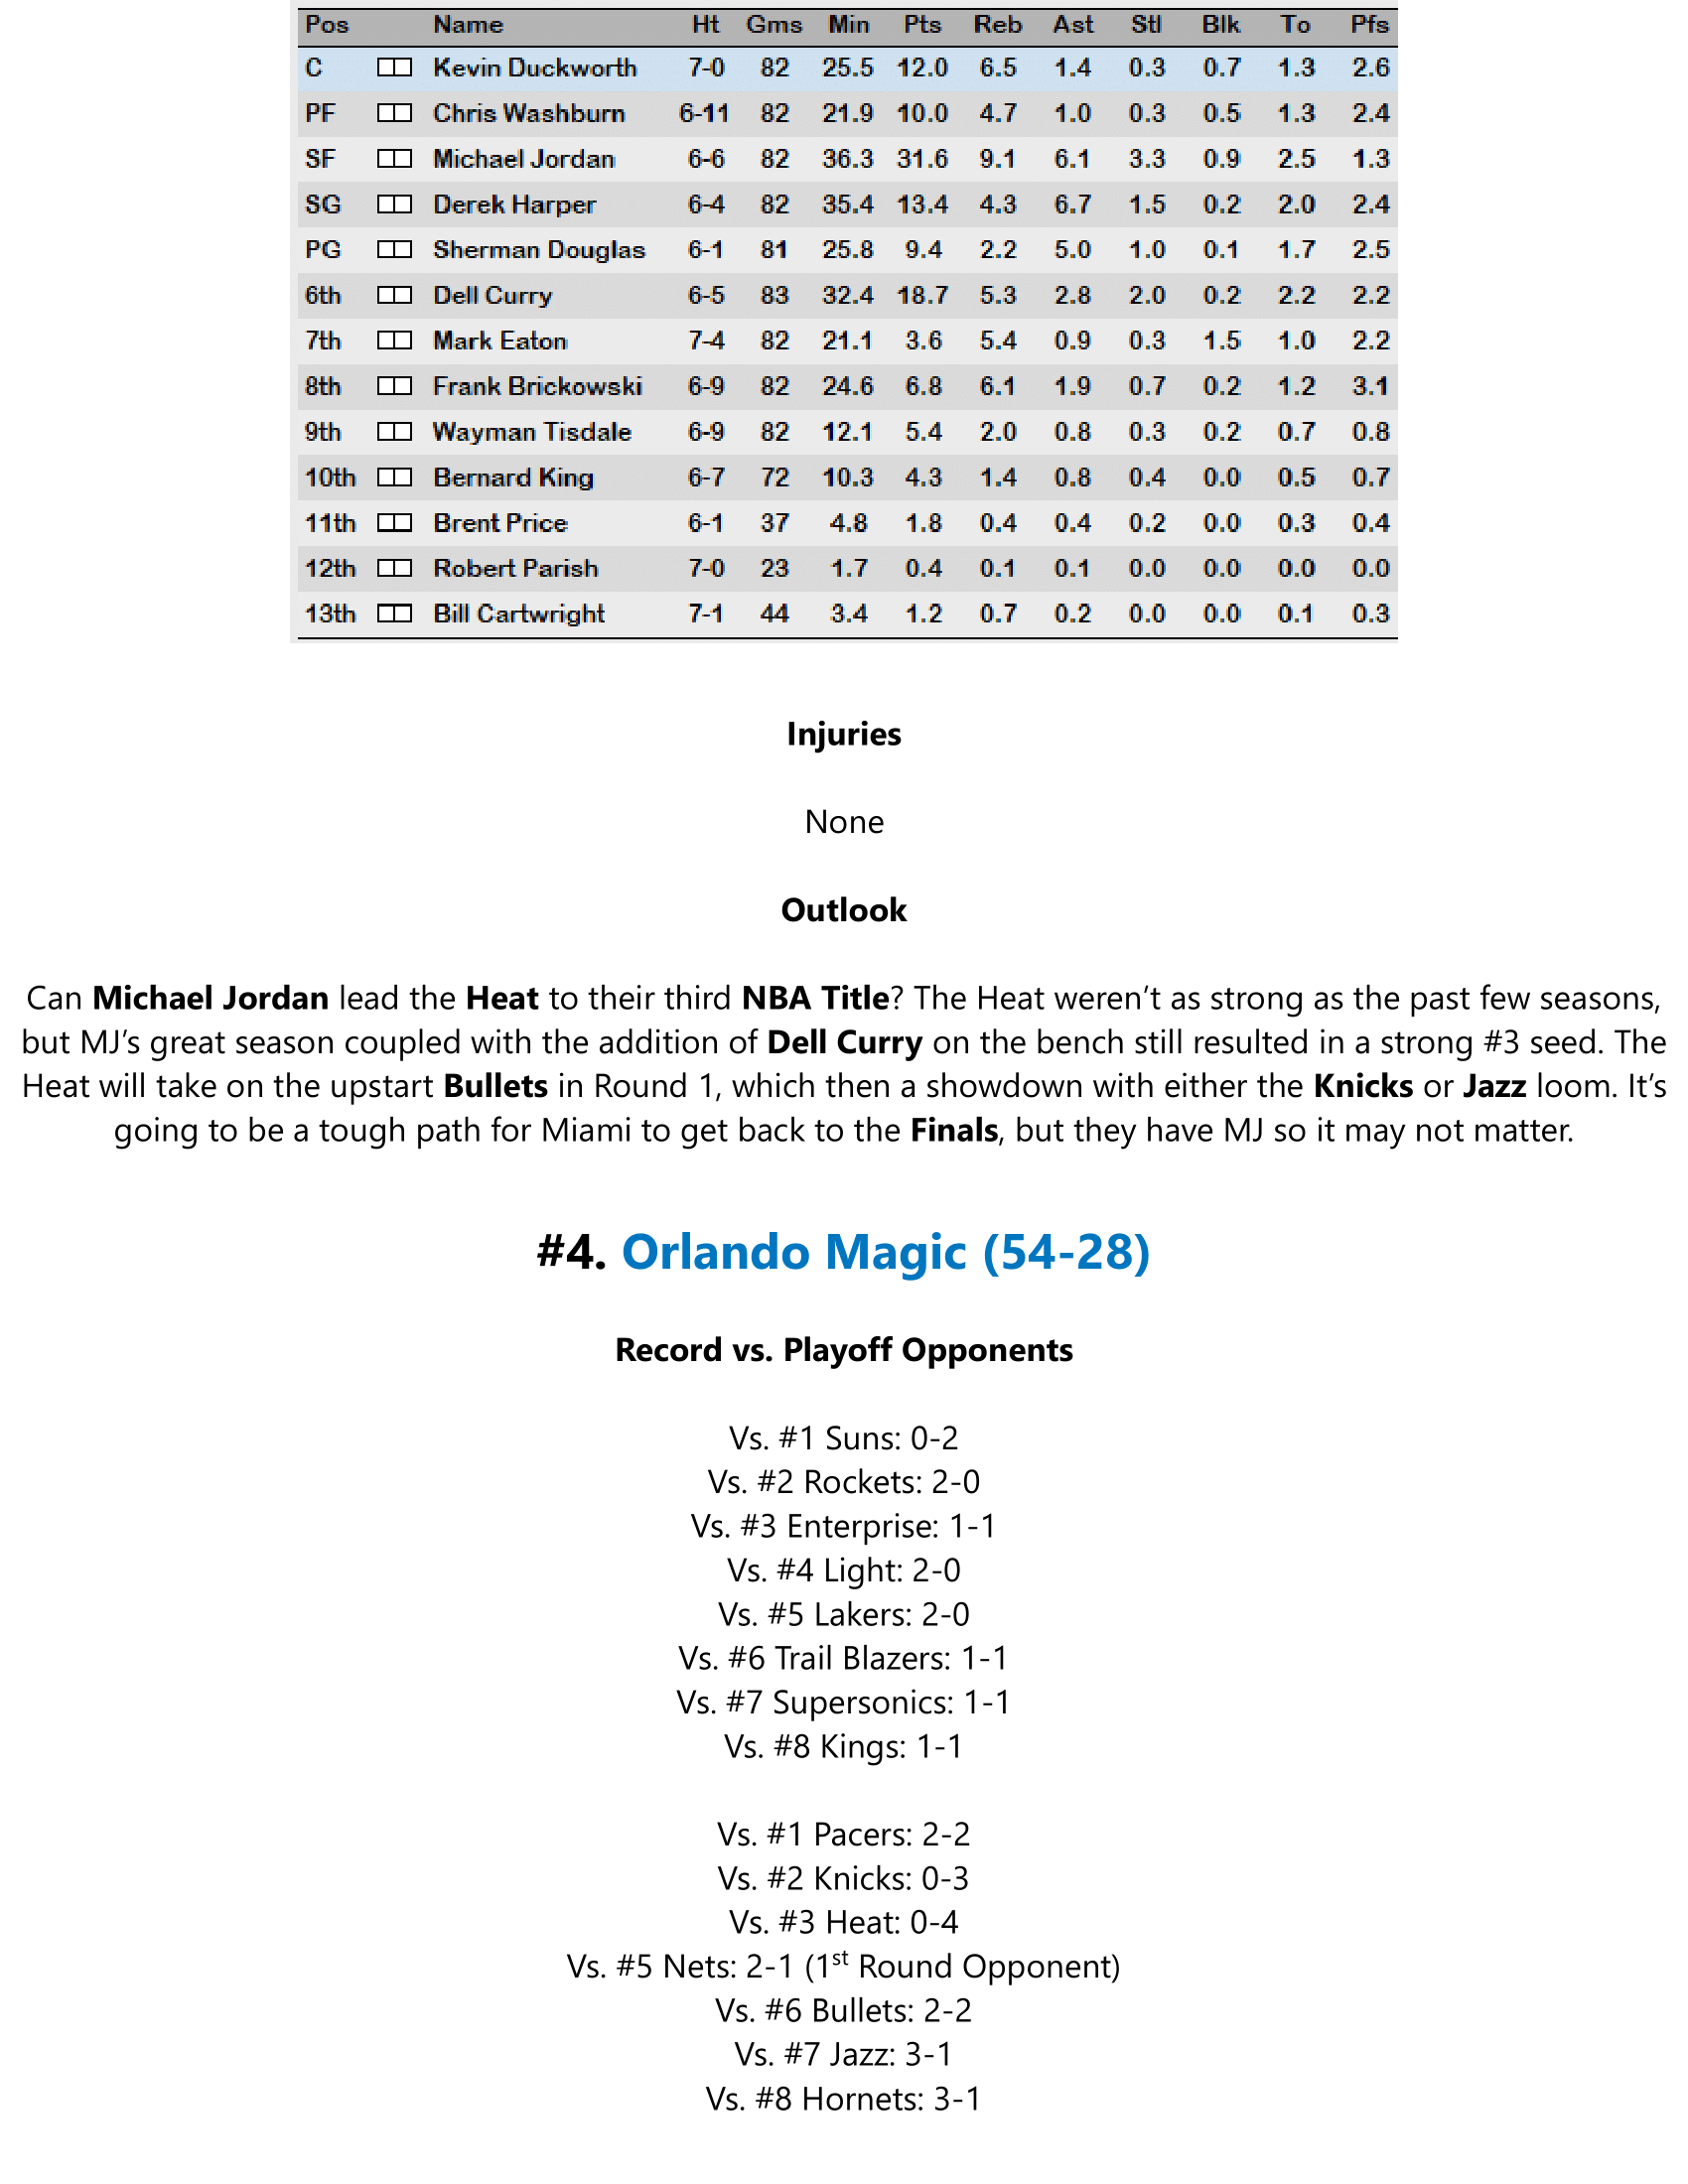 92-93-Part-4-Playoff-Preview-18.png